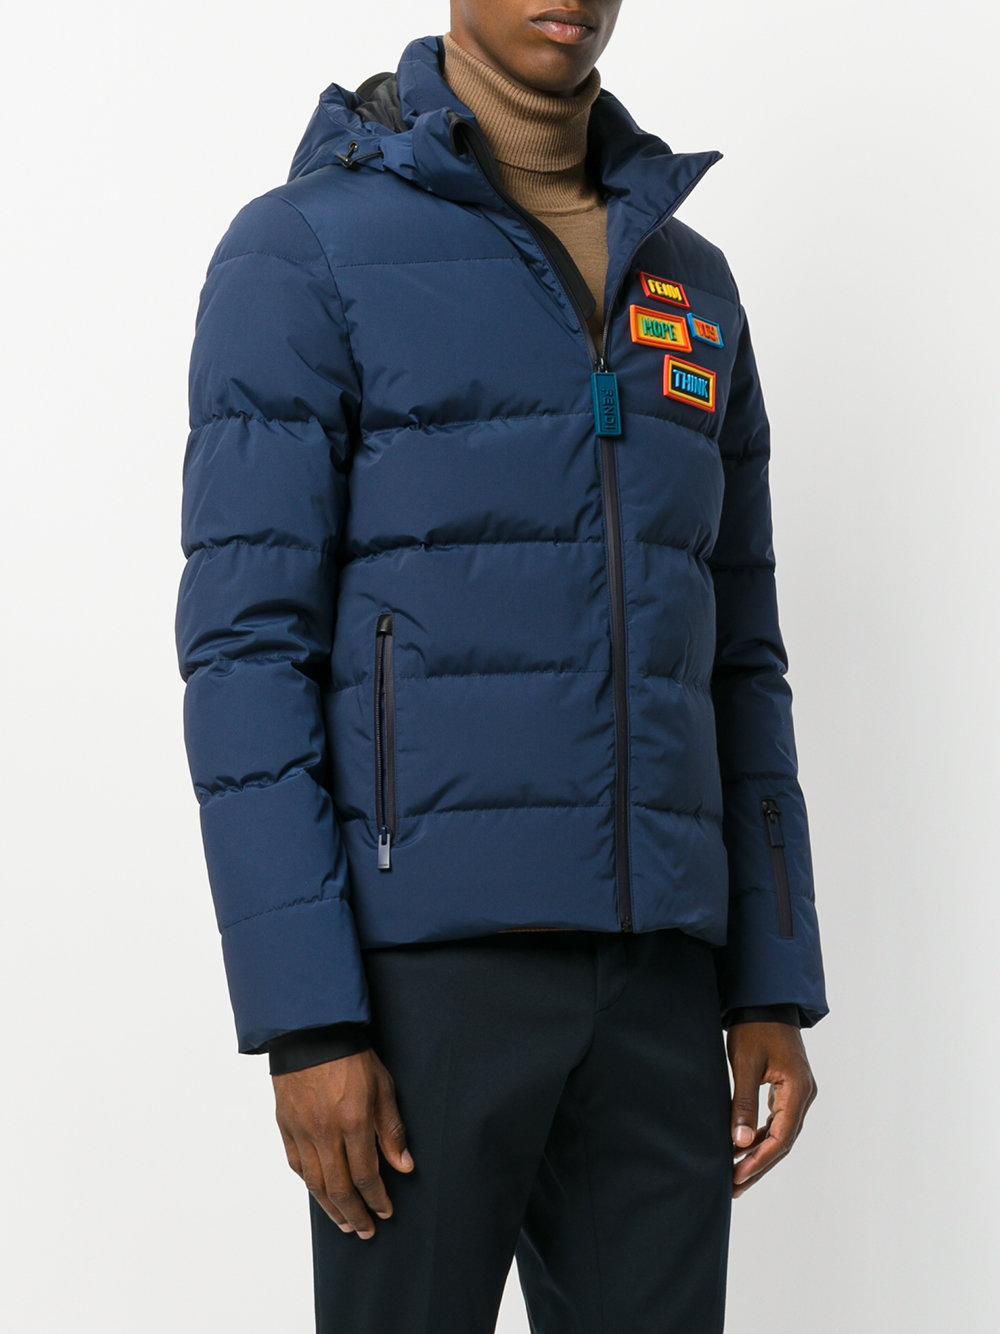 Fendi Synthetic Patch Detail Padded Jacket in Blue for Men - Lyst